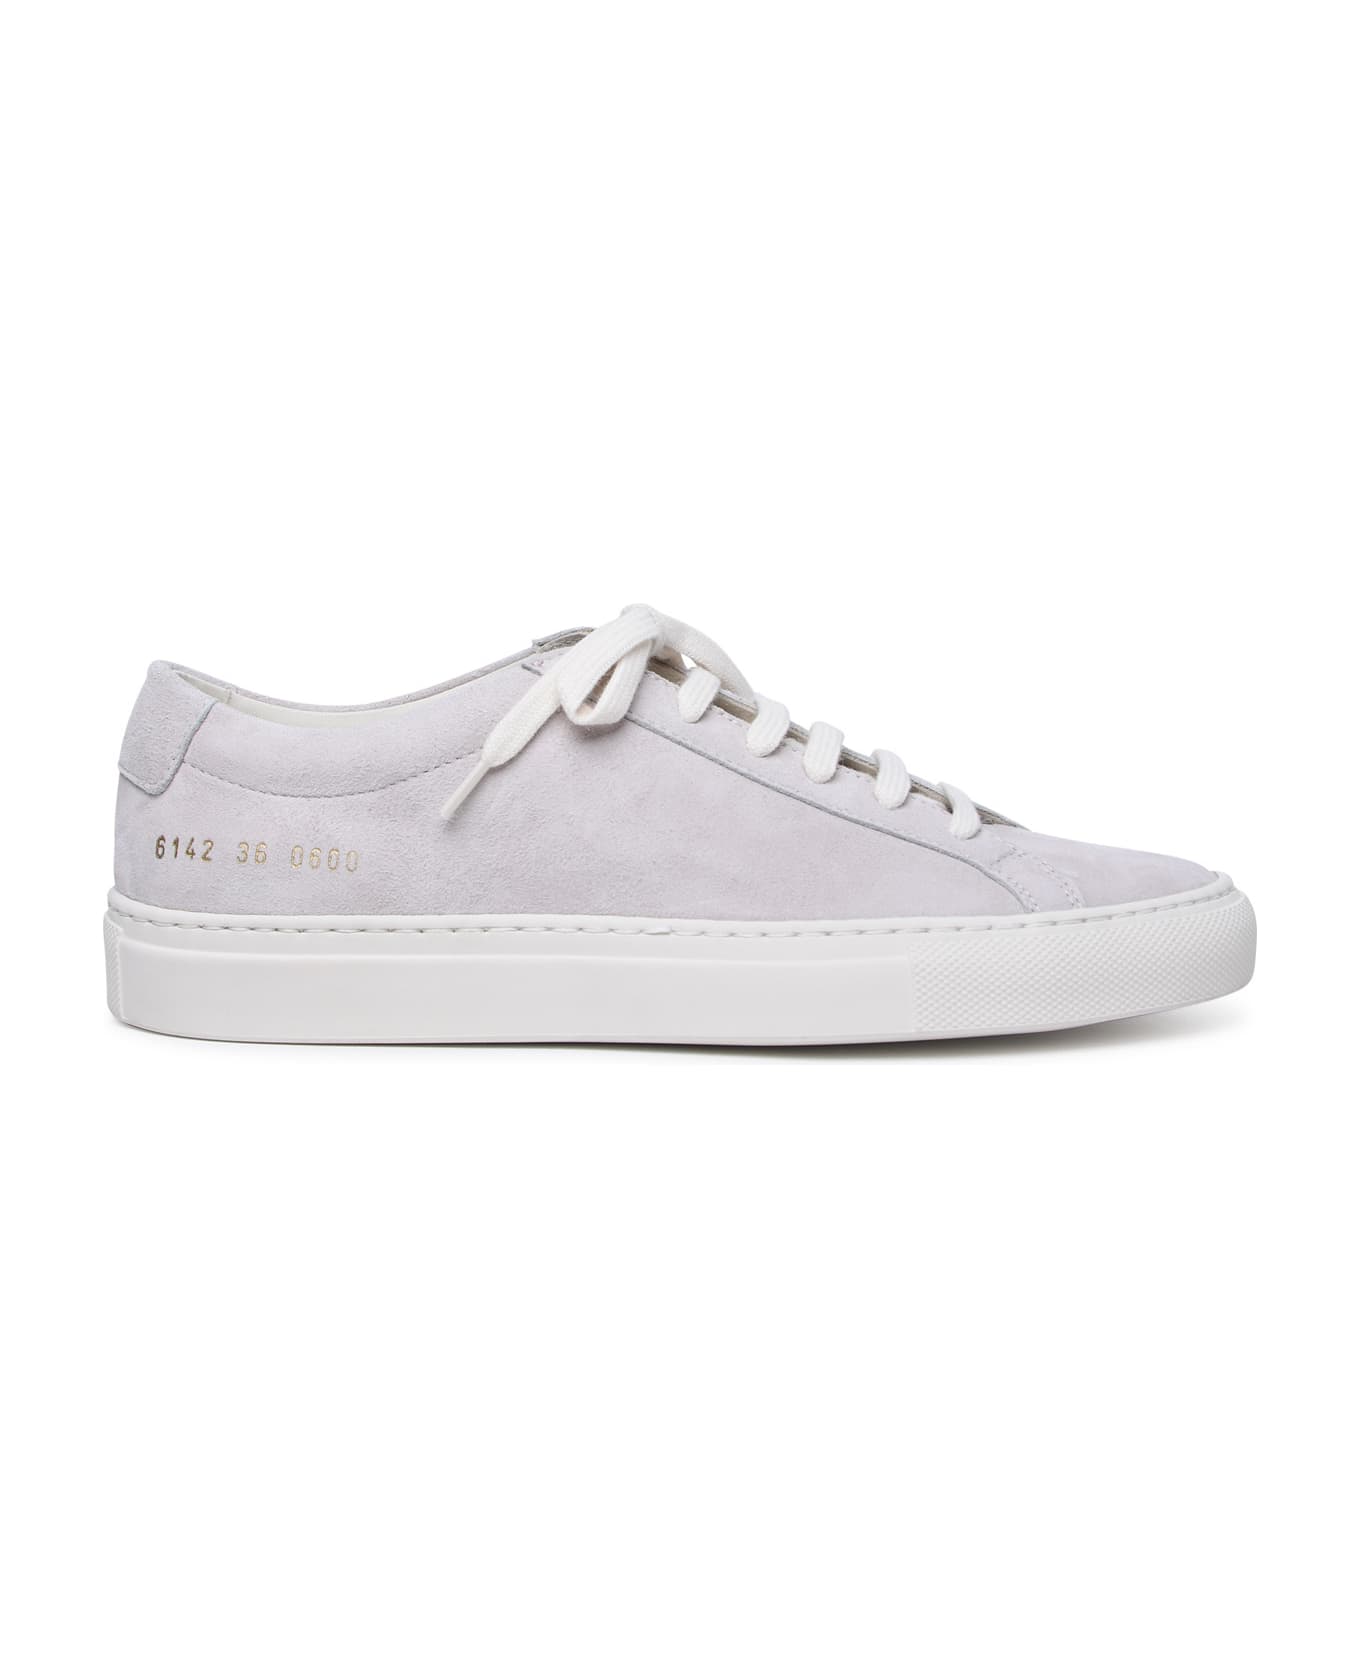 Common Projects Achilles Low Sneakers - Nude スニーカー